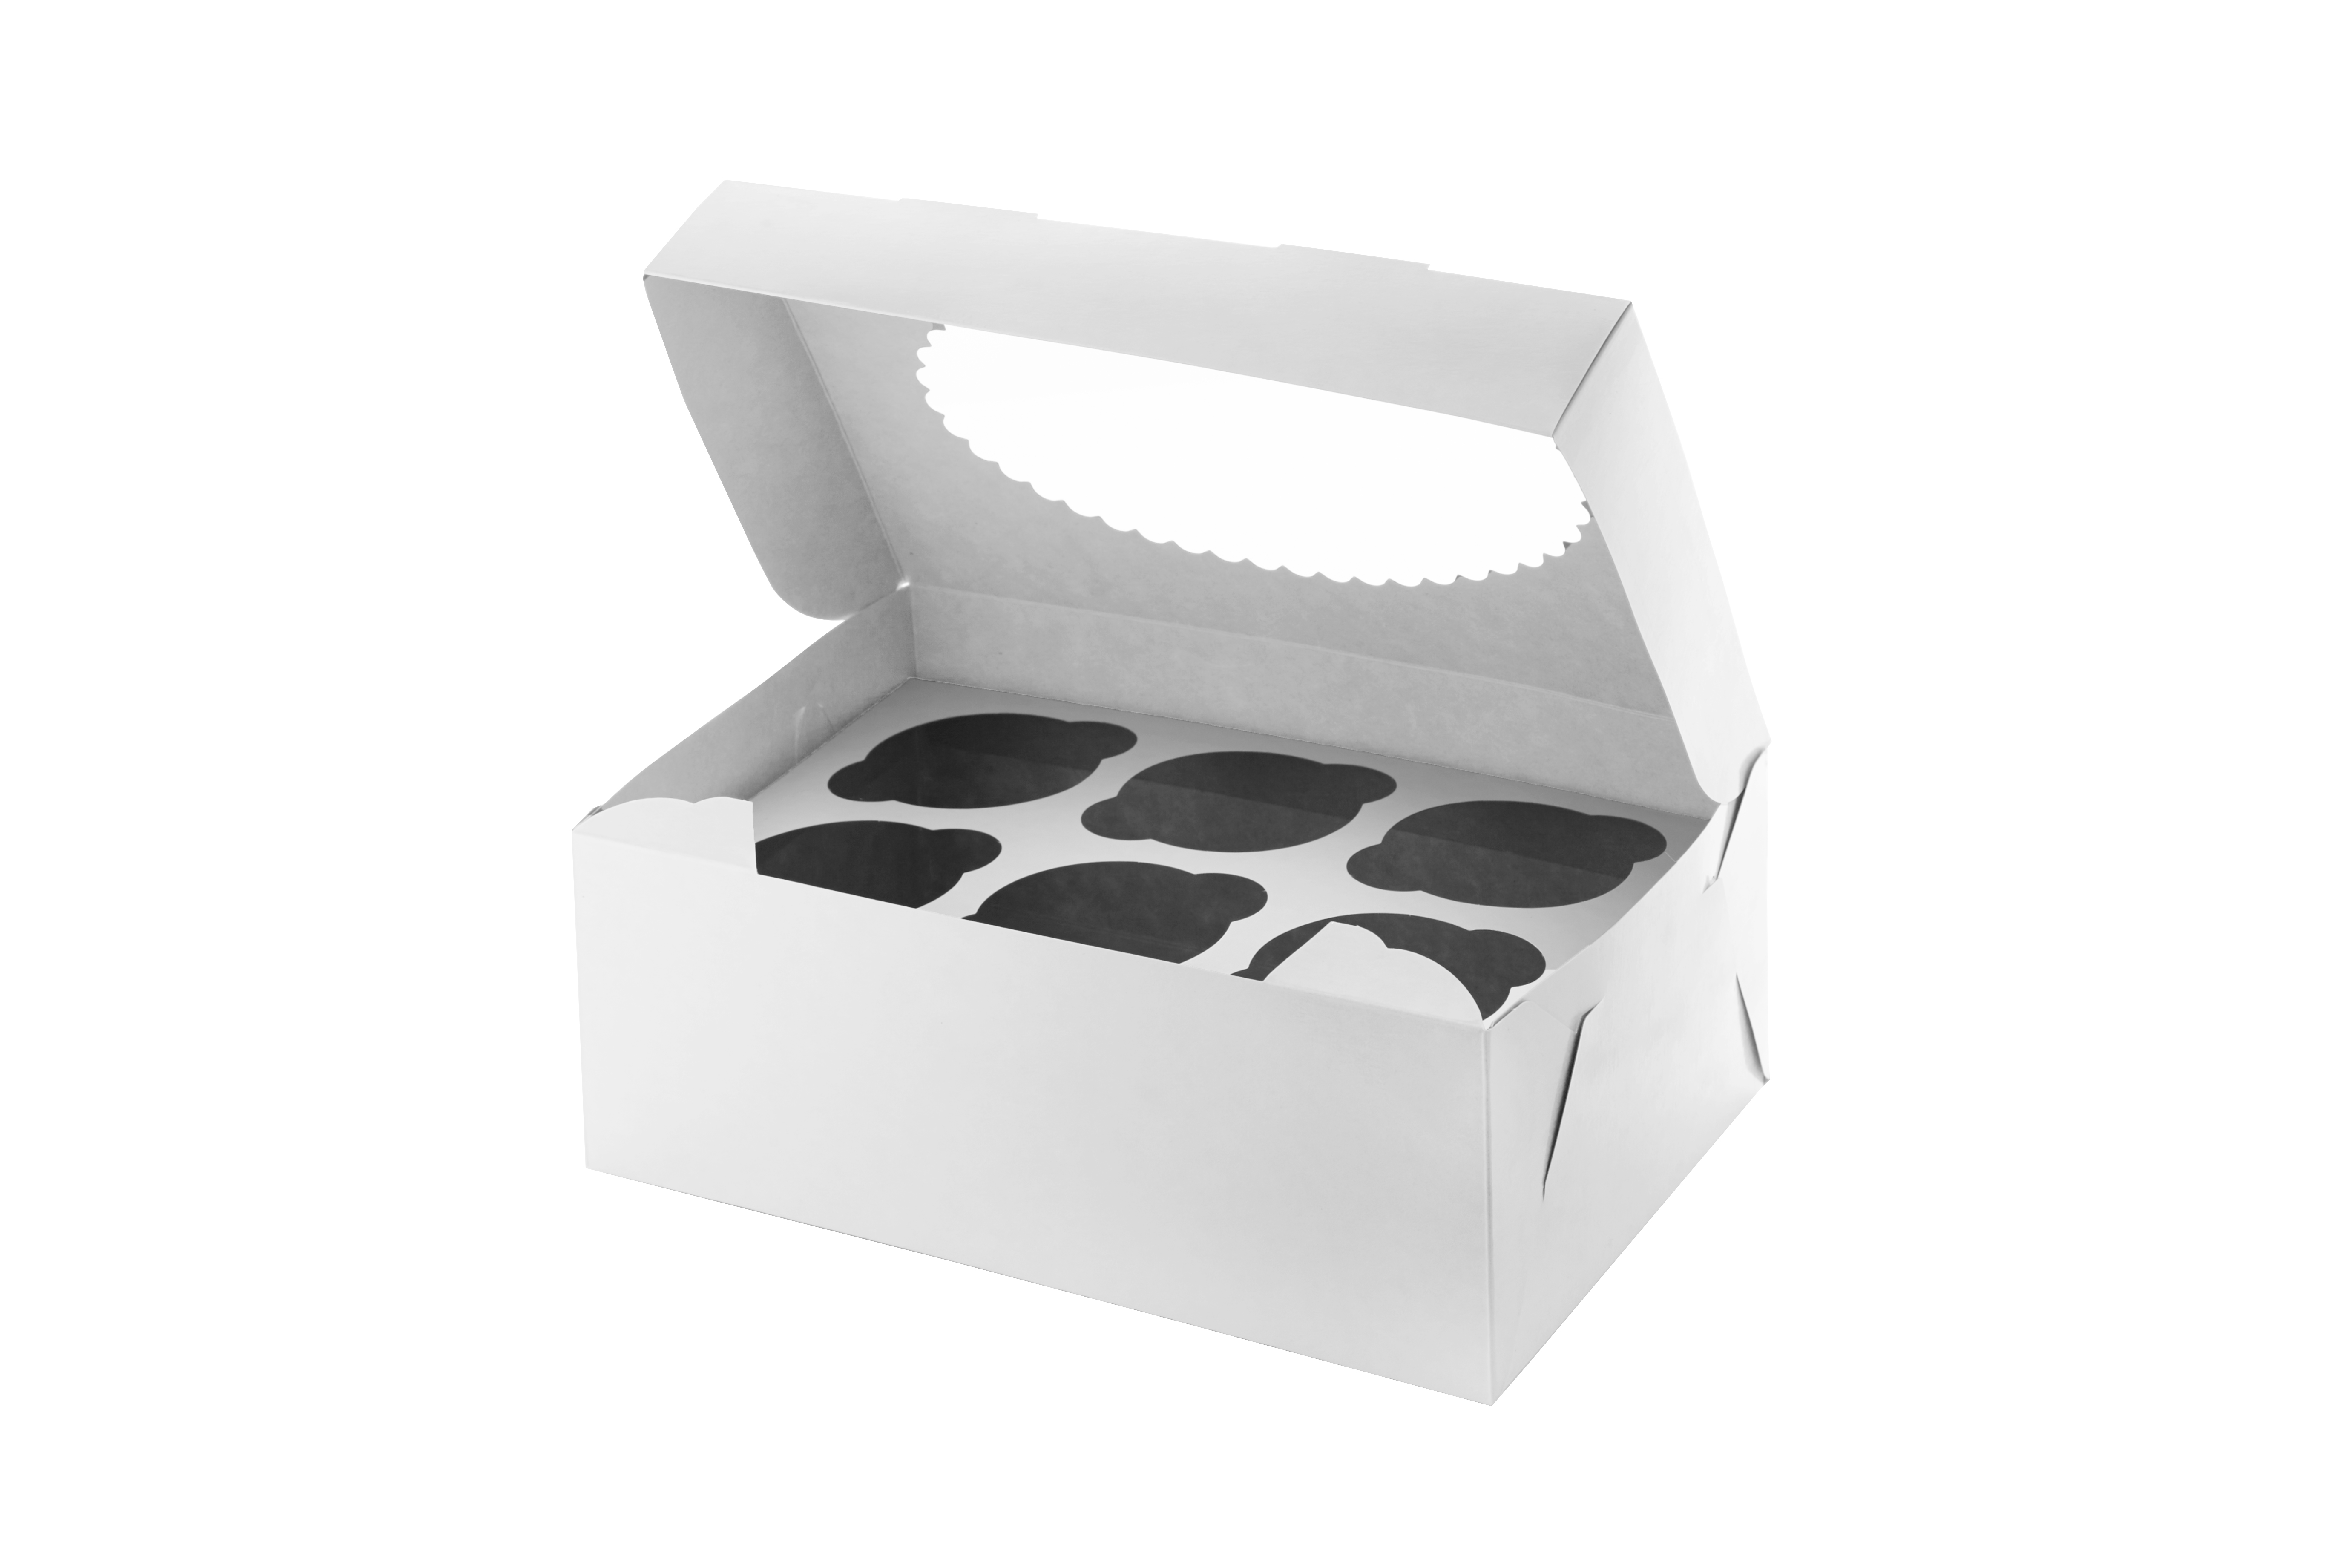 OSQ MUF 12 boxes for muffins